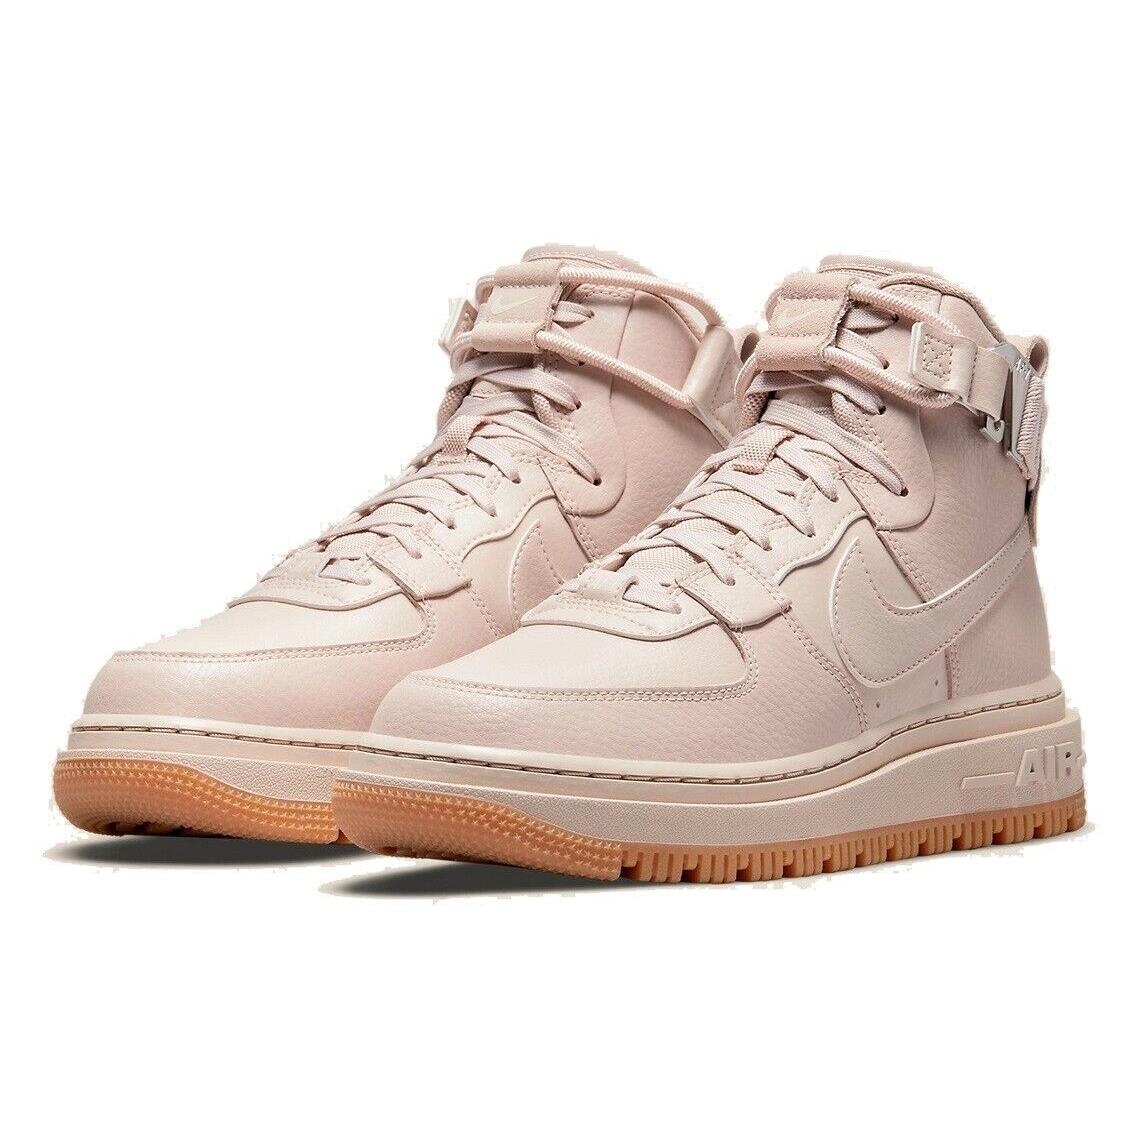 Nike AF1 Hi UT 2.0 Womens Size 8 Sneaker Shoes DC3584 200 Fossil Air Force 1